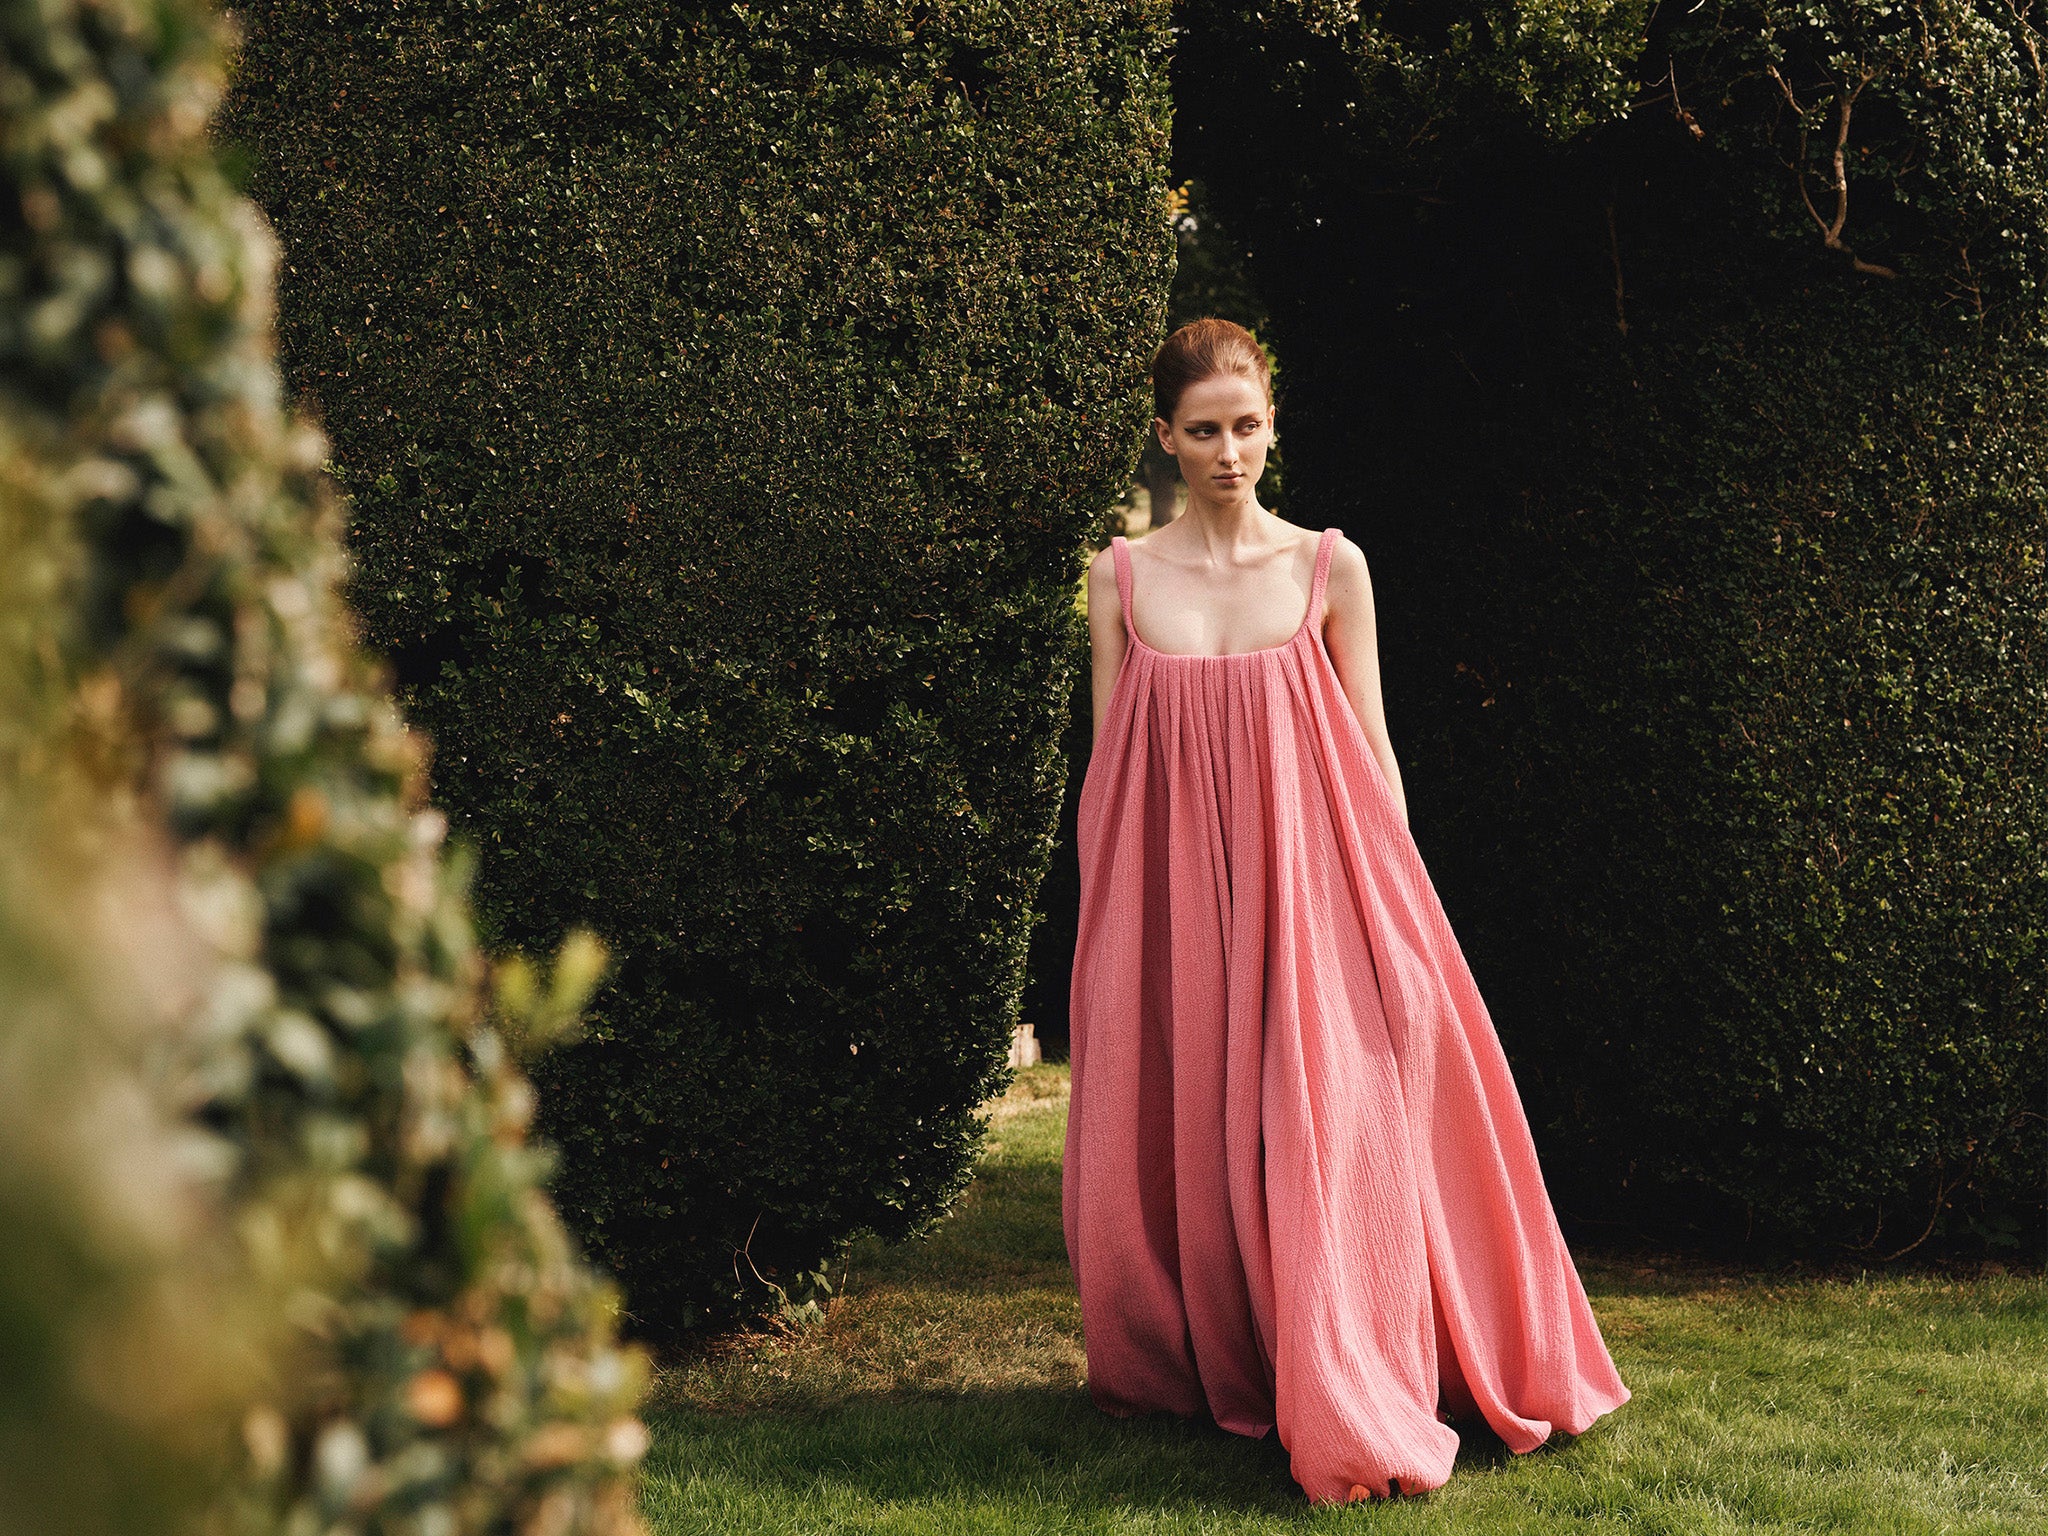 Wickstead’s romantic, floral-heavy collection was inspired by French film ‘Last Year at Marienbad’